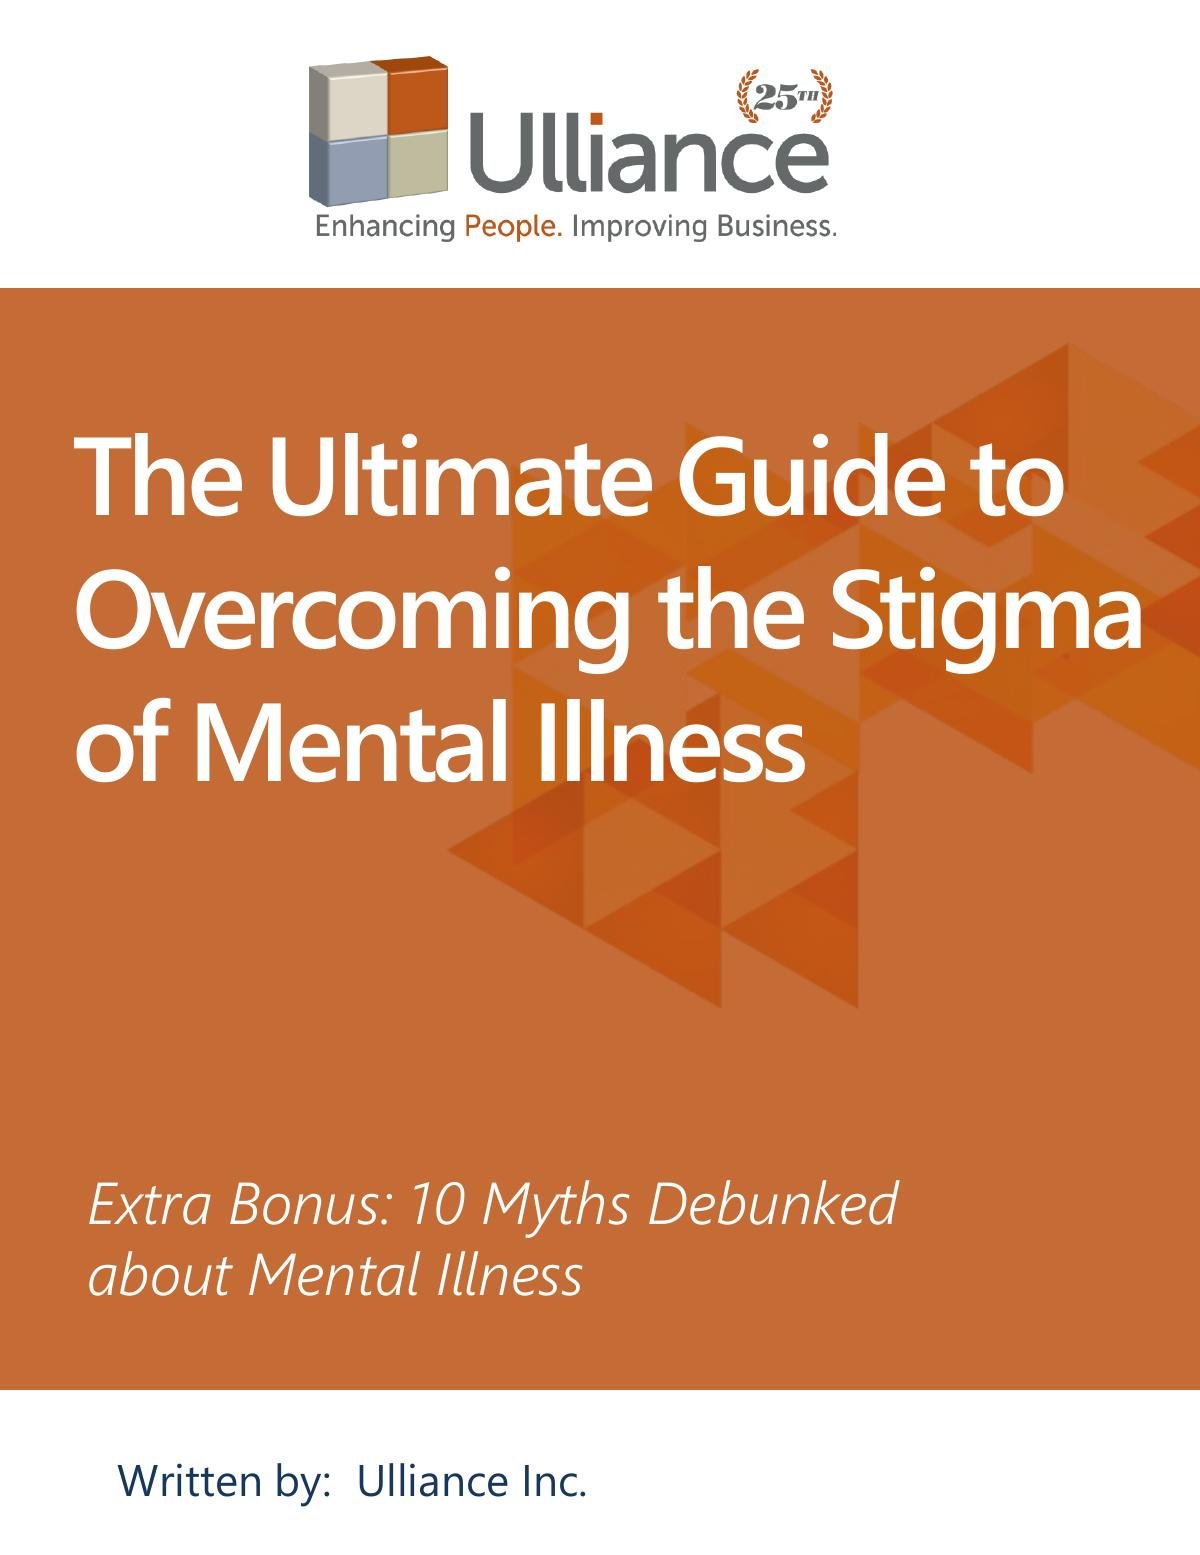 The Ultimate Guide to Overcoming the Stigma of Mental Illness